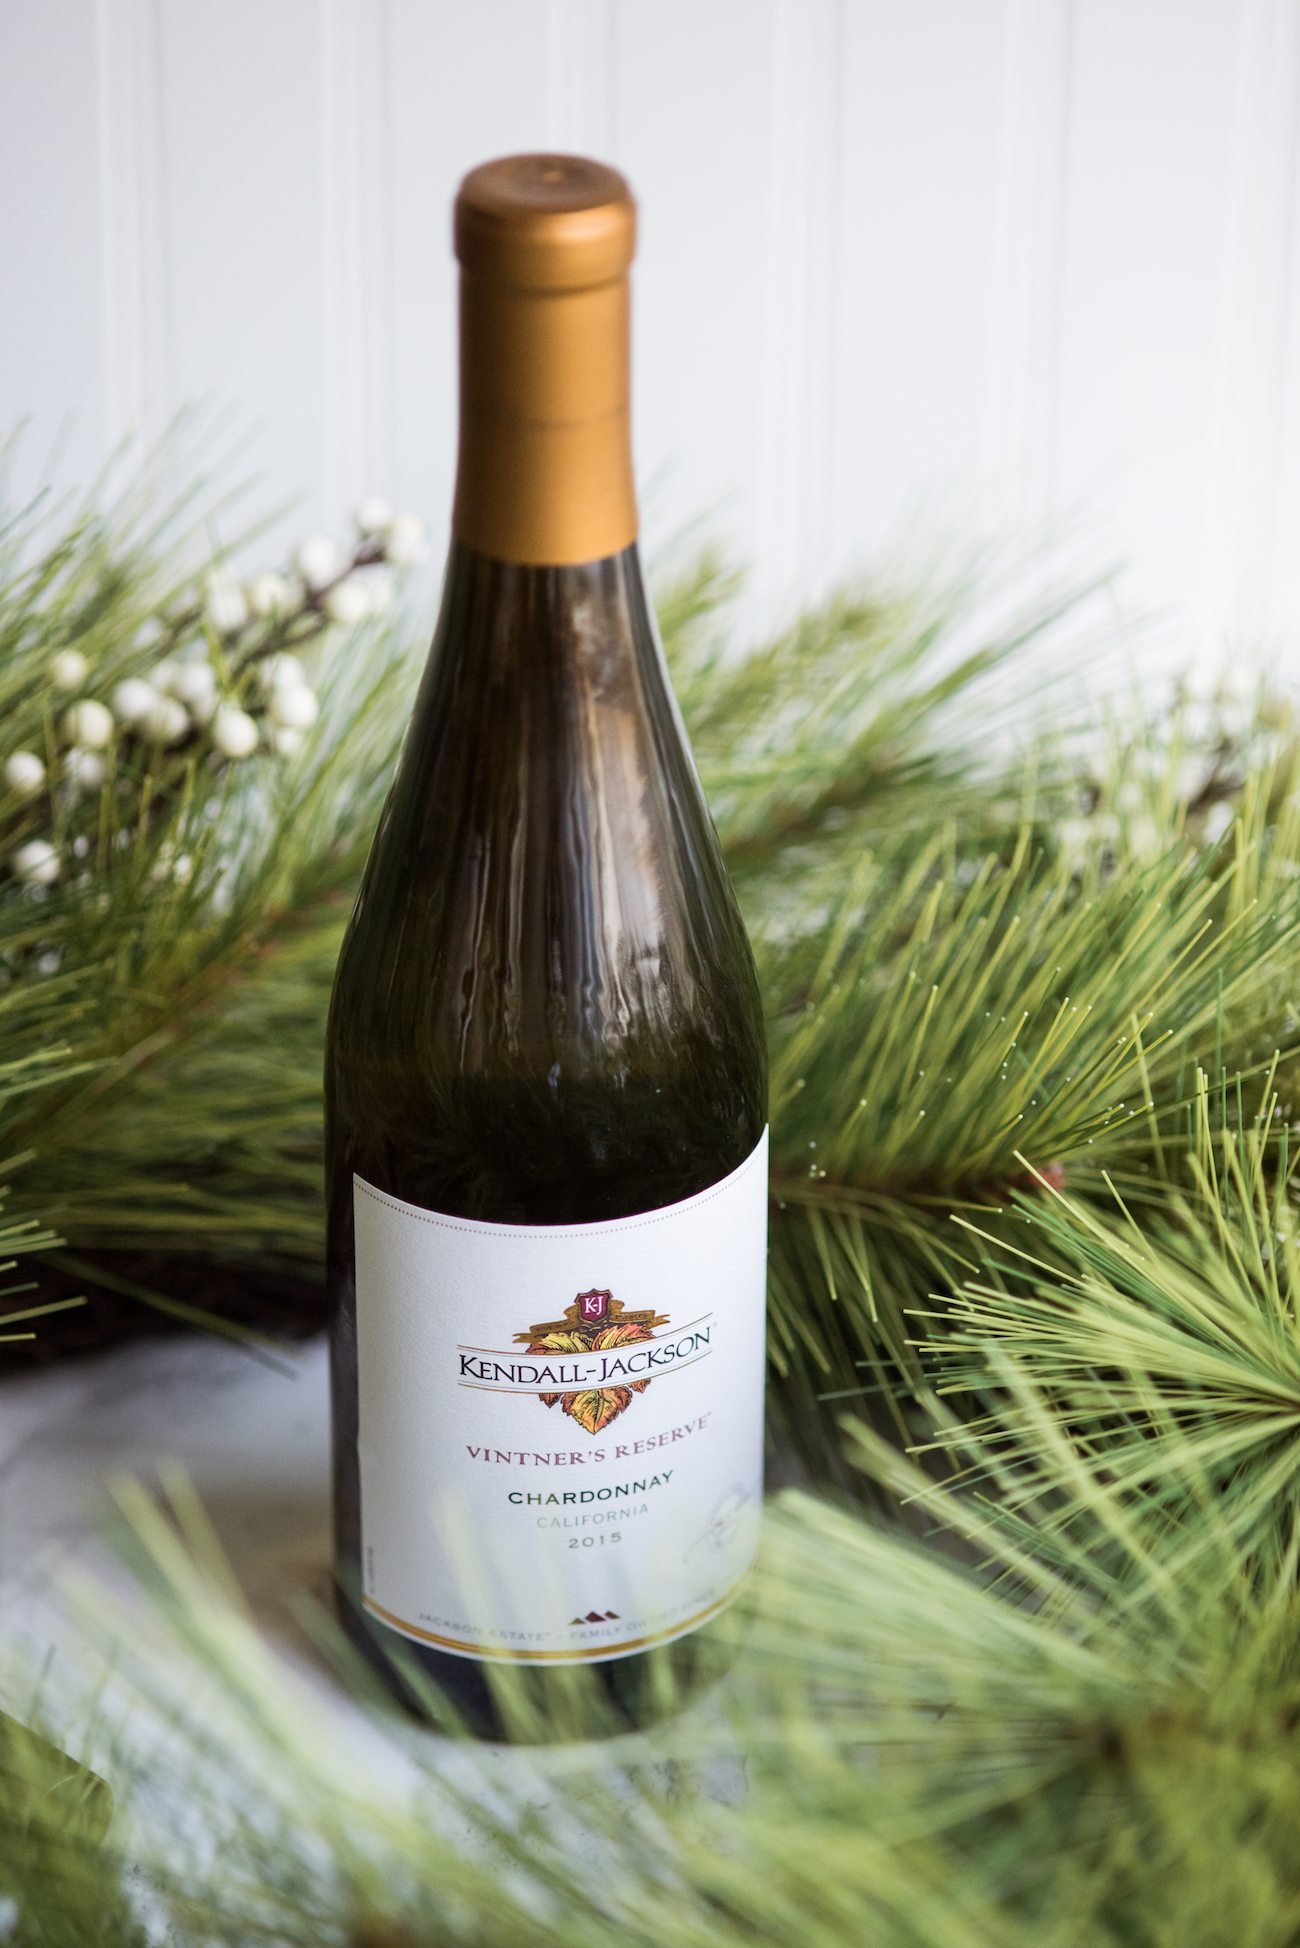 The Sweetest Occasion's Holiday Wine Guide (All Under $25) | Entertaining tips, holiday party ideas, holiday gift ideas and more from @cydconverse